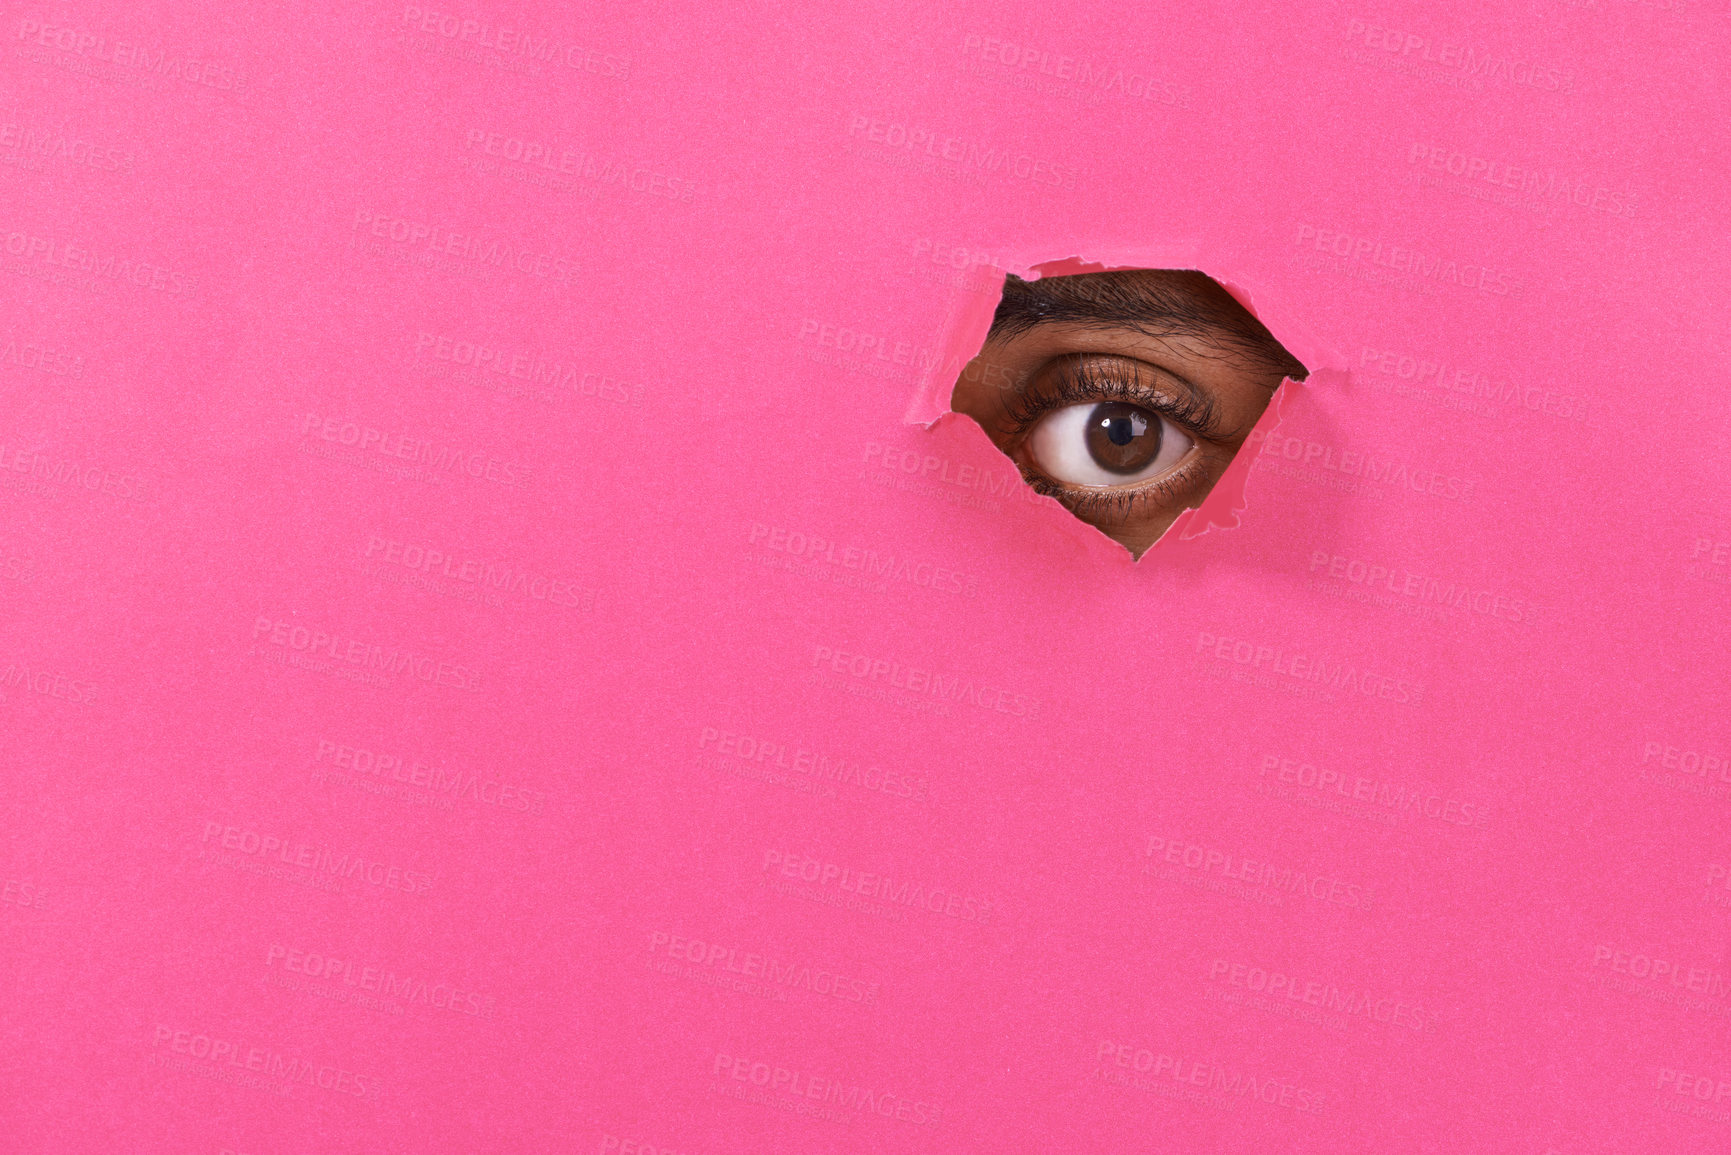 Buy stock photo A view of a man's eye looking through a hole in some colorful paper